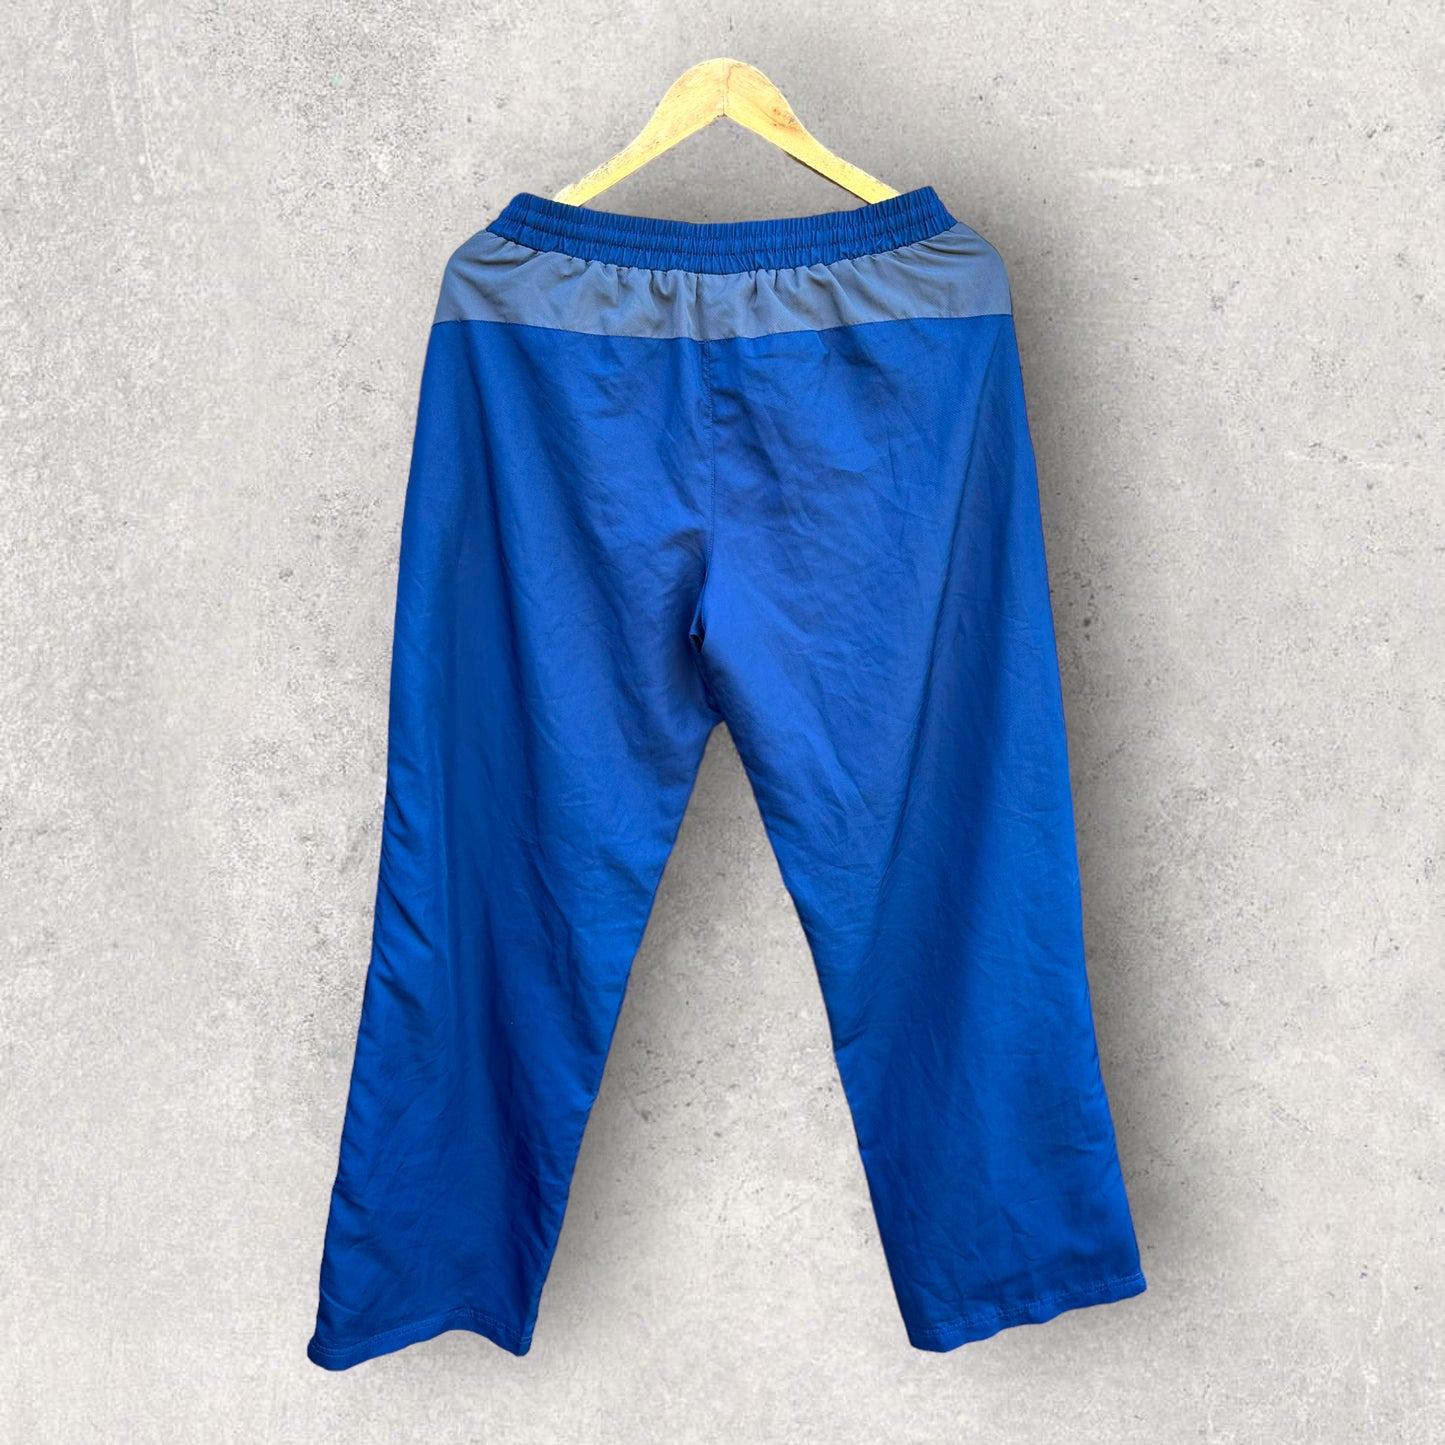 NRL REF ACADEMY TRACK PANTS ISSUED